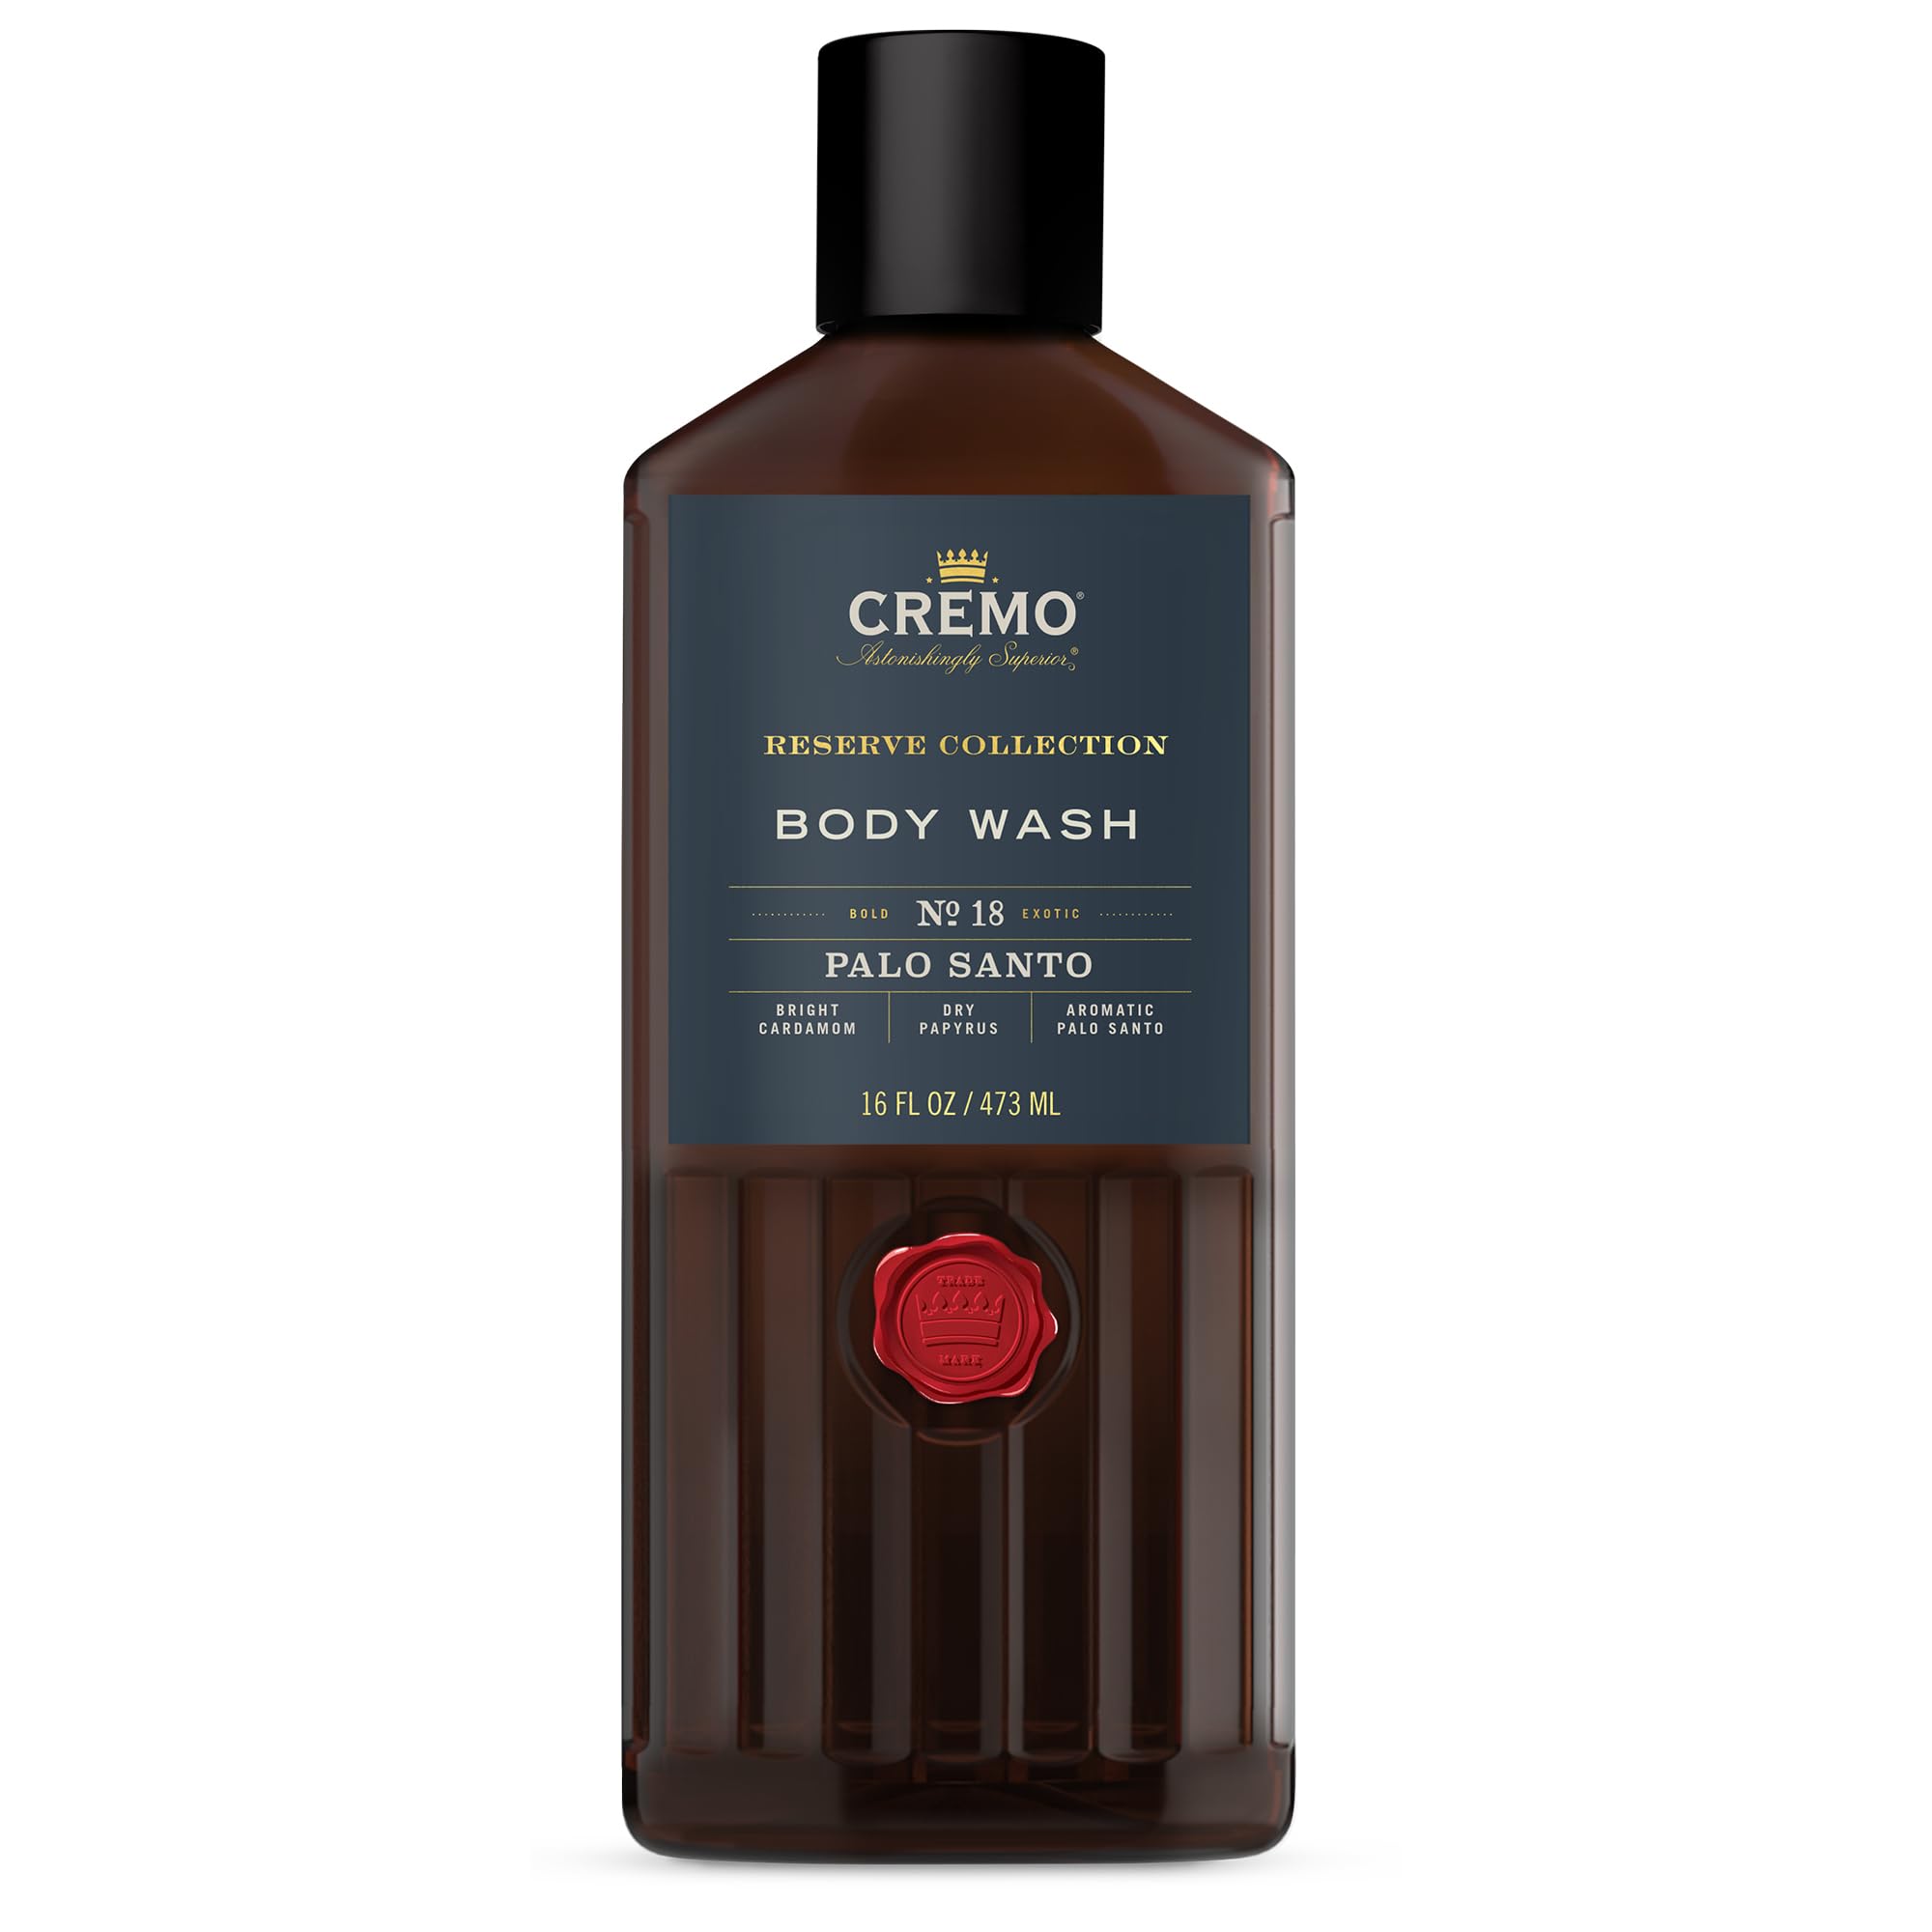 Cremo Rich-Lathering Palo Santo (Reserve Collection) Body Wash, Notes of Bright Cardamom, Dry Papyrus and Aromatic Palo Santo, 16 Fl Oz